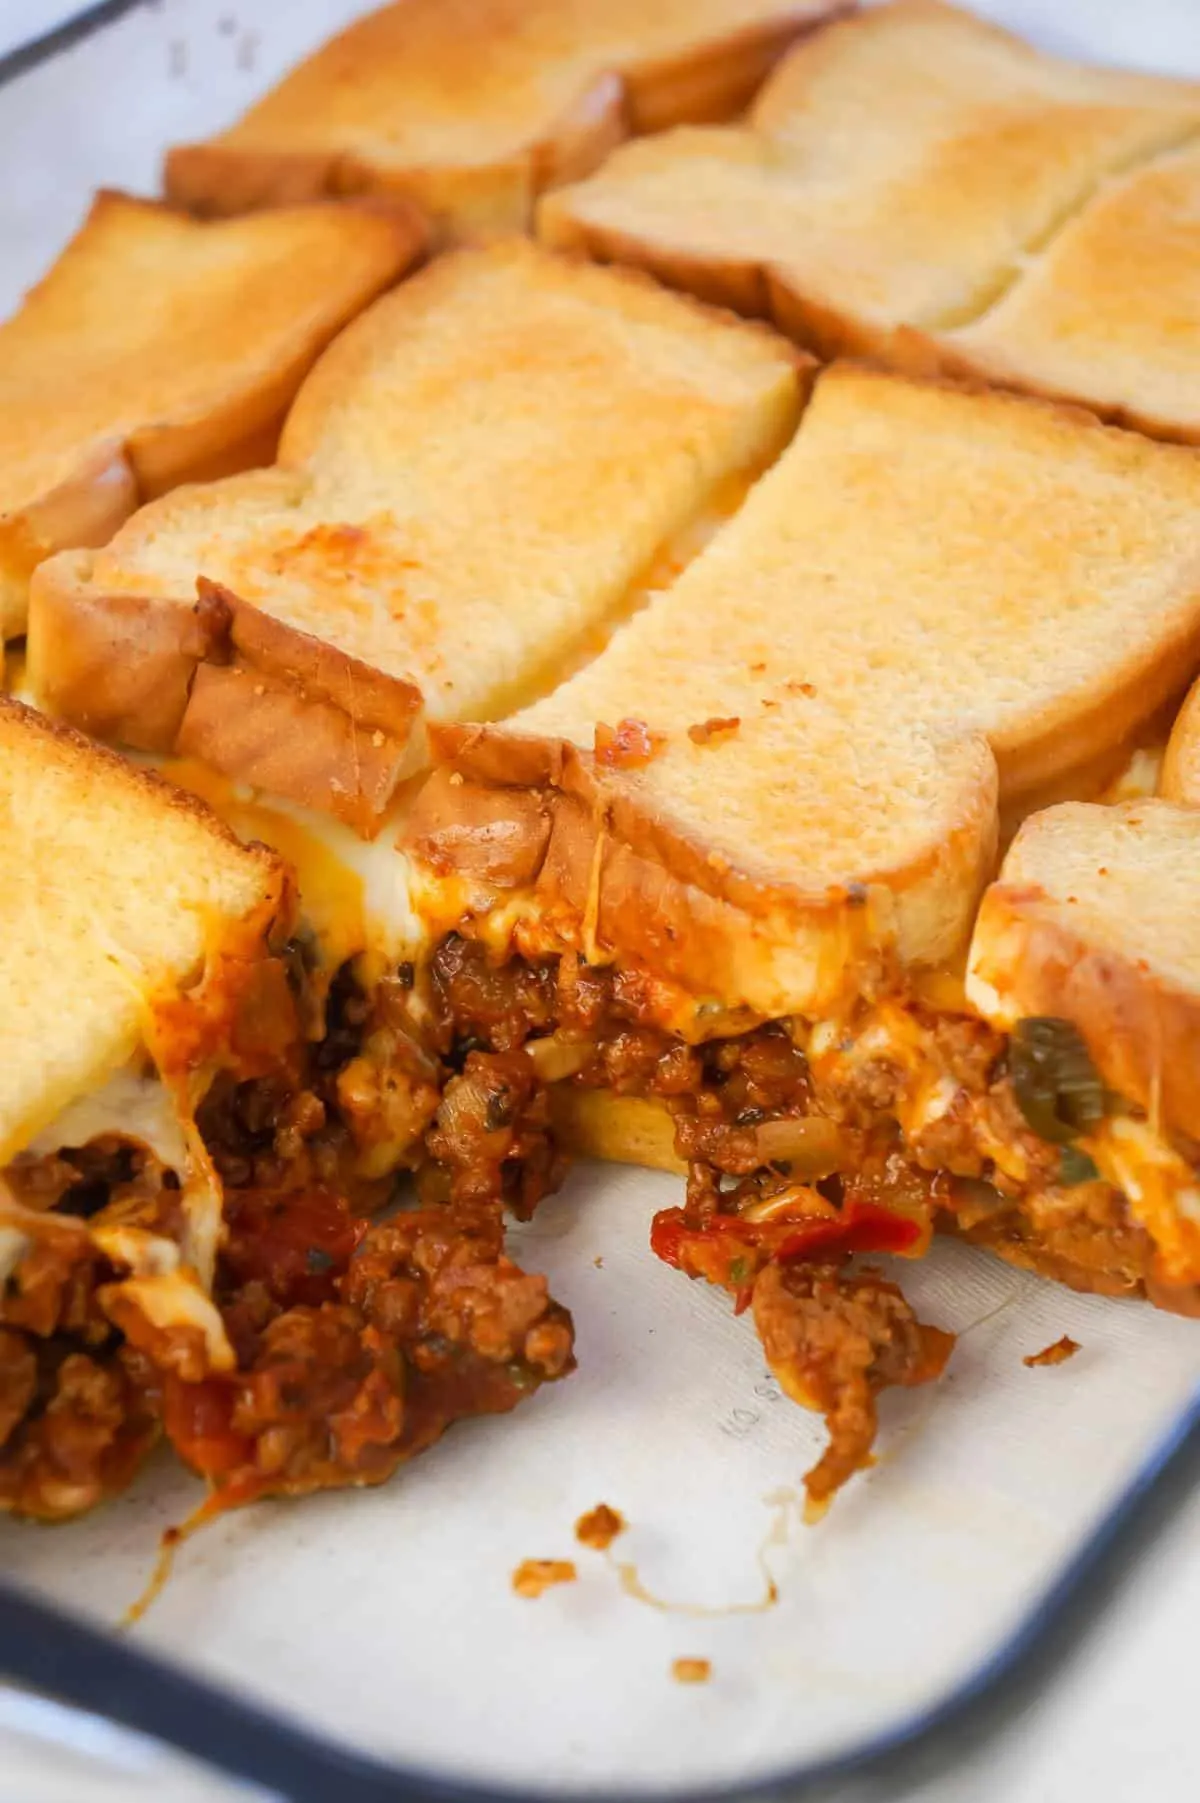 Beef Taco Grilled Cheese Casserole is an easy casserole recipe with layers of toasted bread, cheese and ground beef tossed in salsa, chili sauce and taco seasoning.